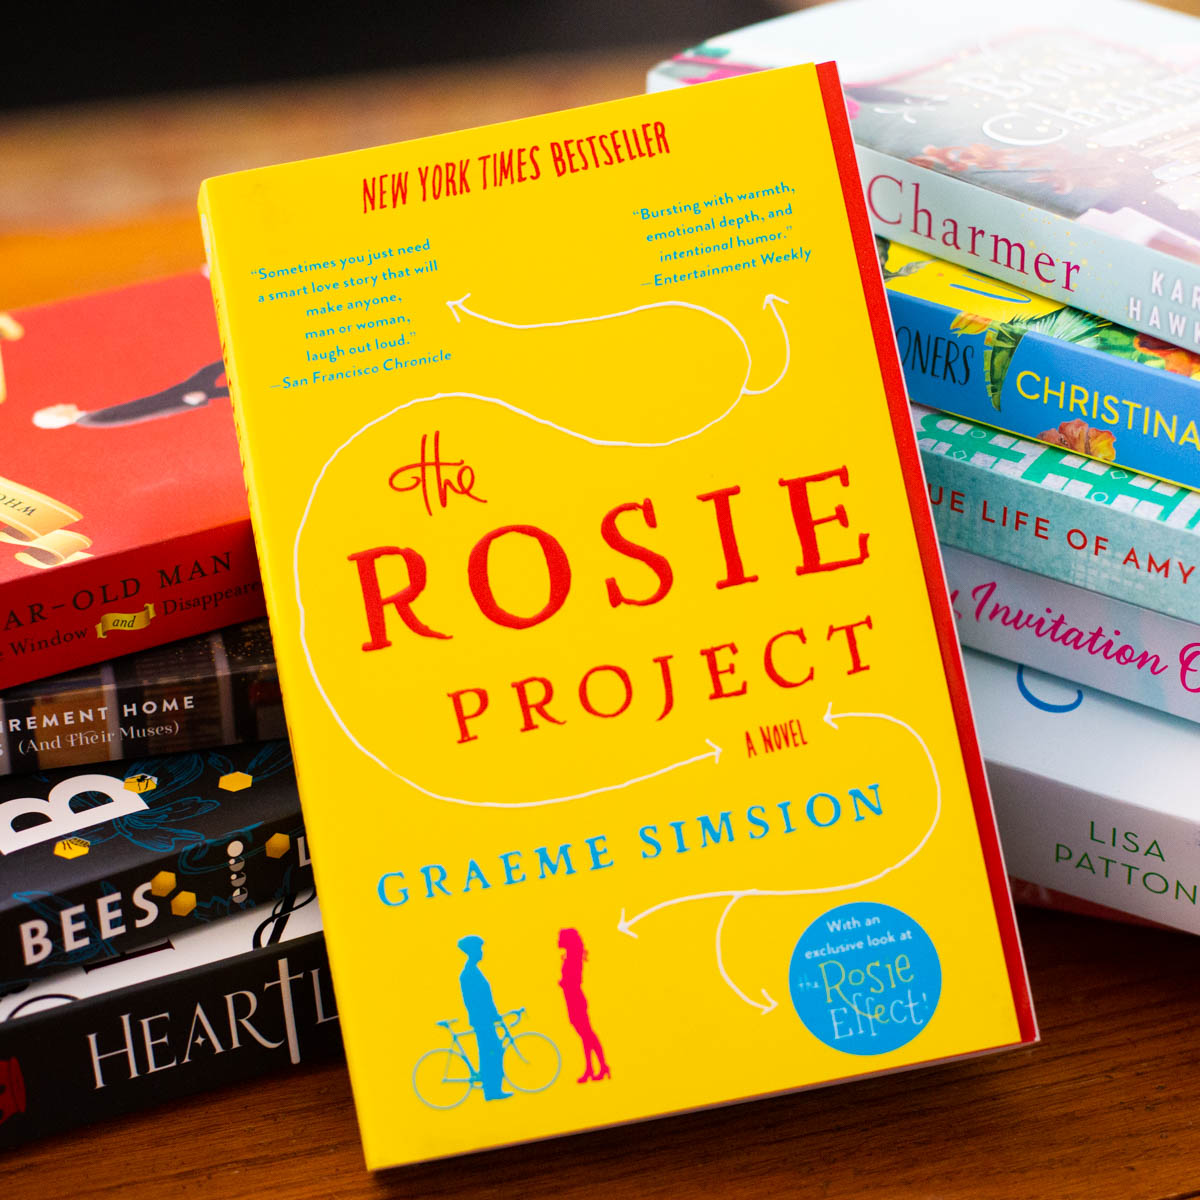 A copy of The Rosie Project is on the table.